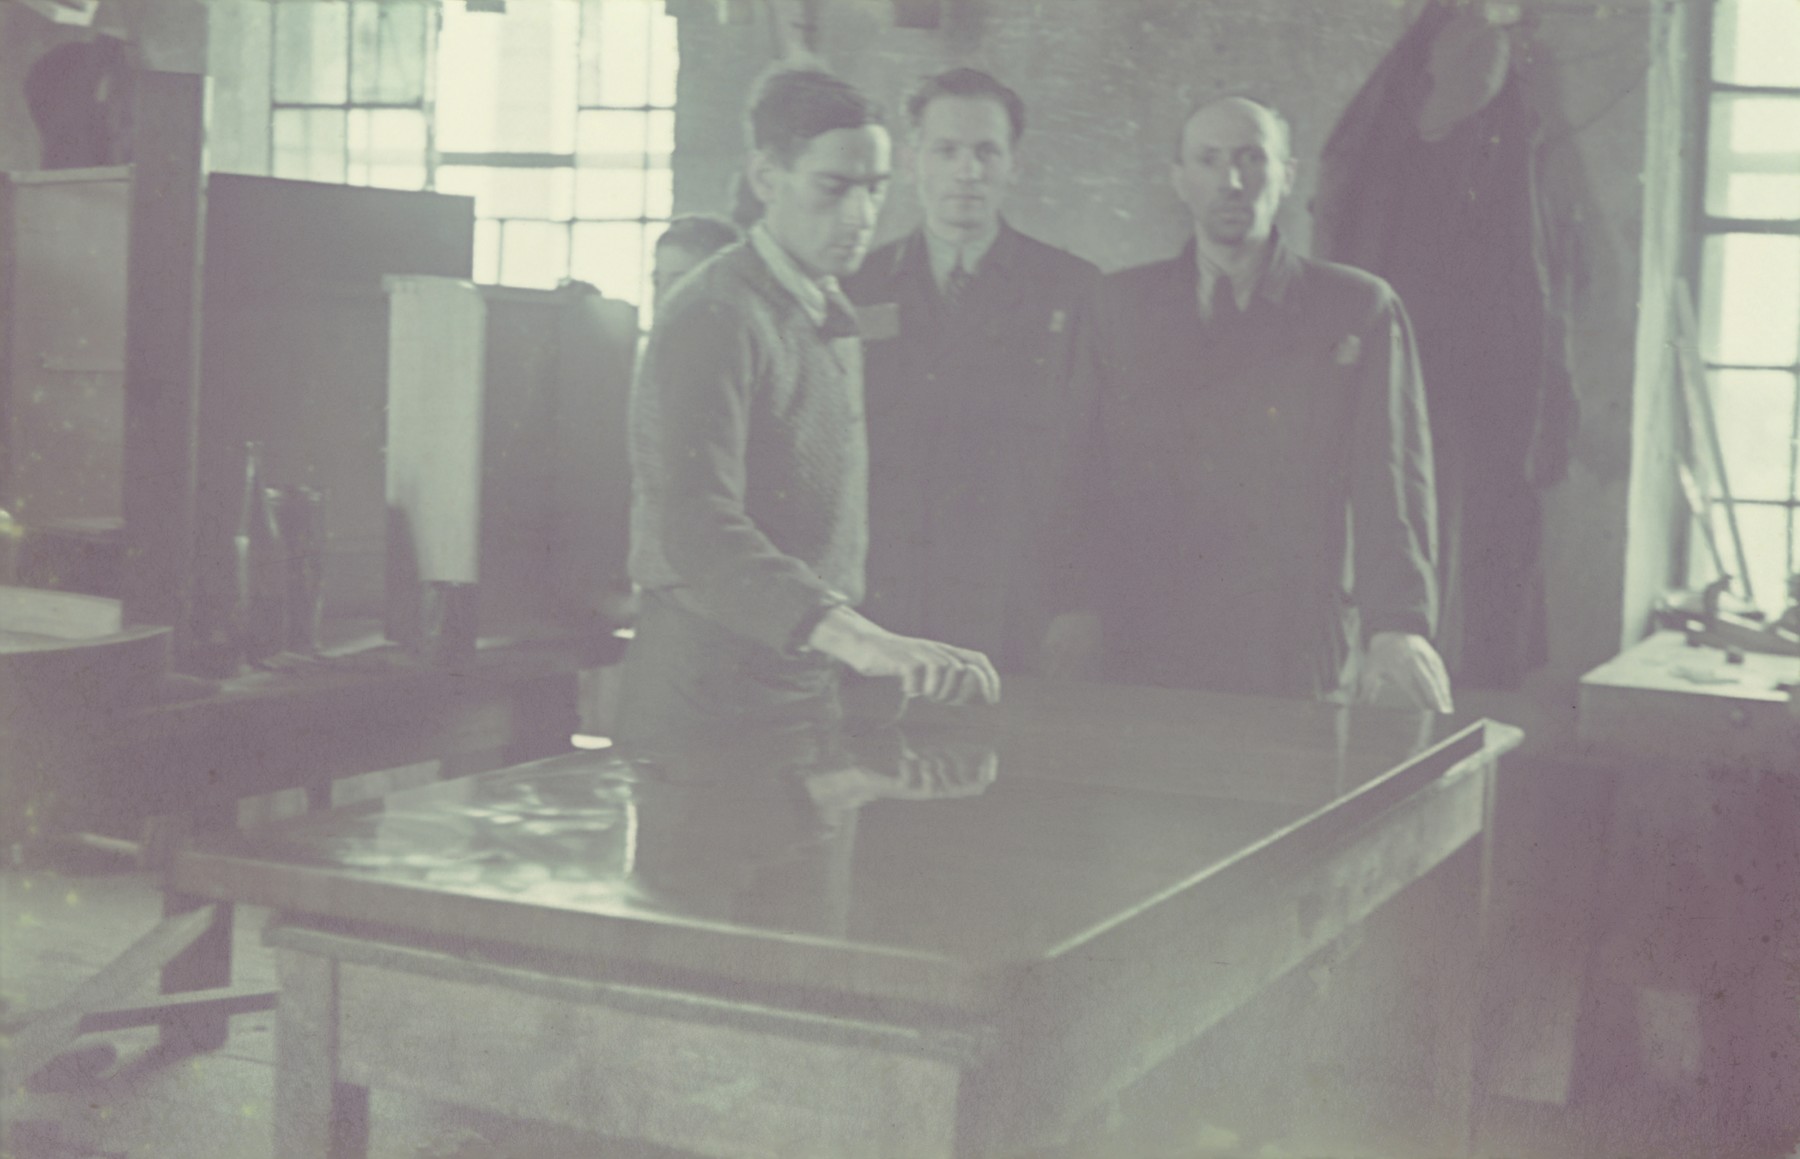 Three men examine the finish of a table in the furniture factory of the Lodz ghetto.

Original German caption: "Getto-Litzmannstqadt, Moebelfabrik" (furniture factory), 1942, #12.